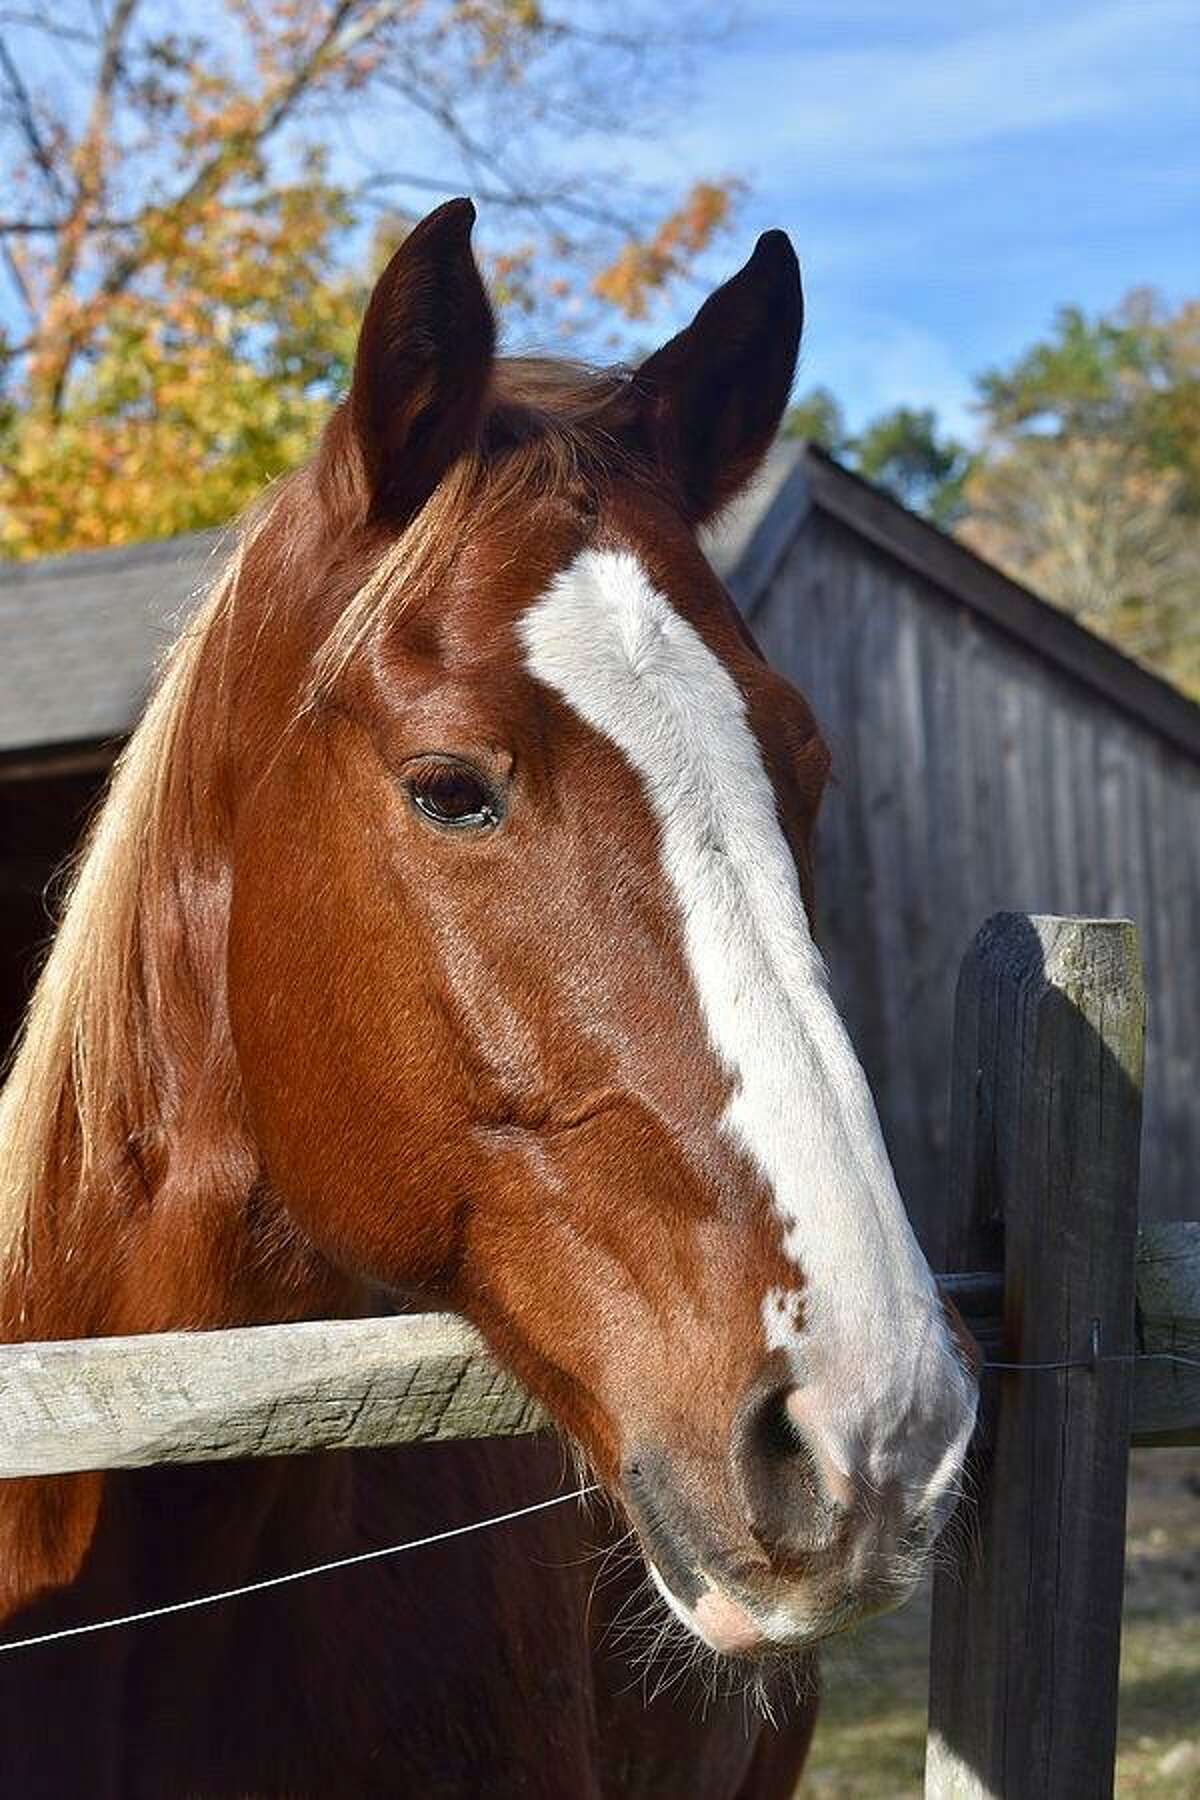 H.O.R.S.E. of CT on Wilbur Road in Washington, with its horses including Zeus, is taking part in Open House Day 2018.